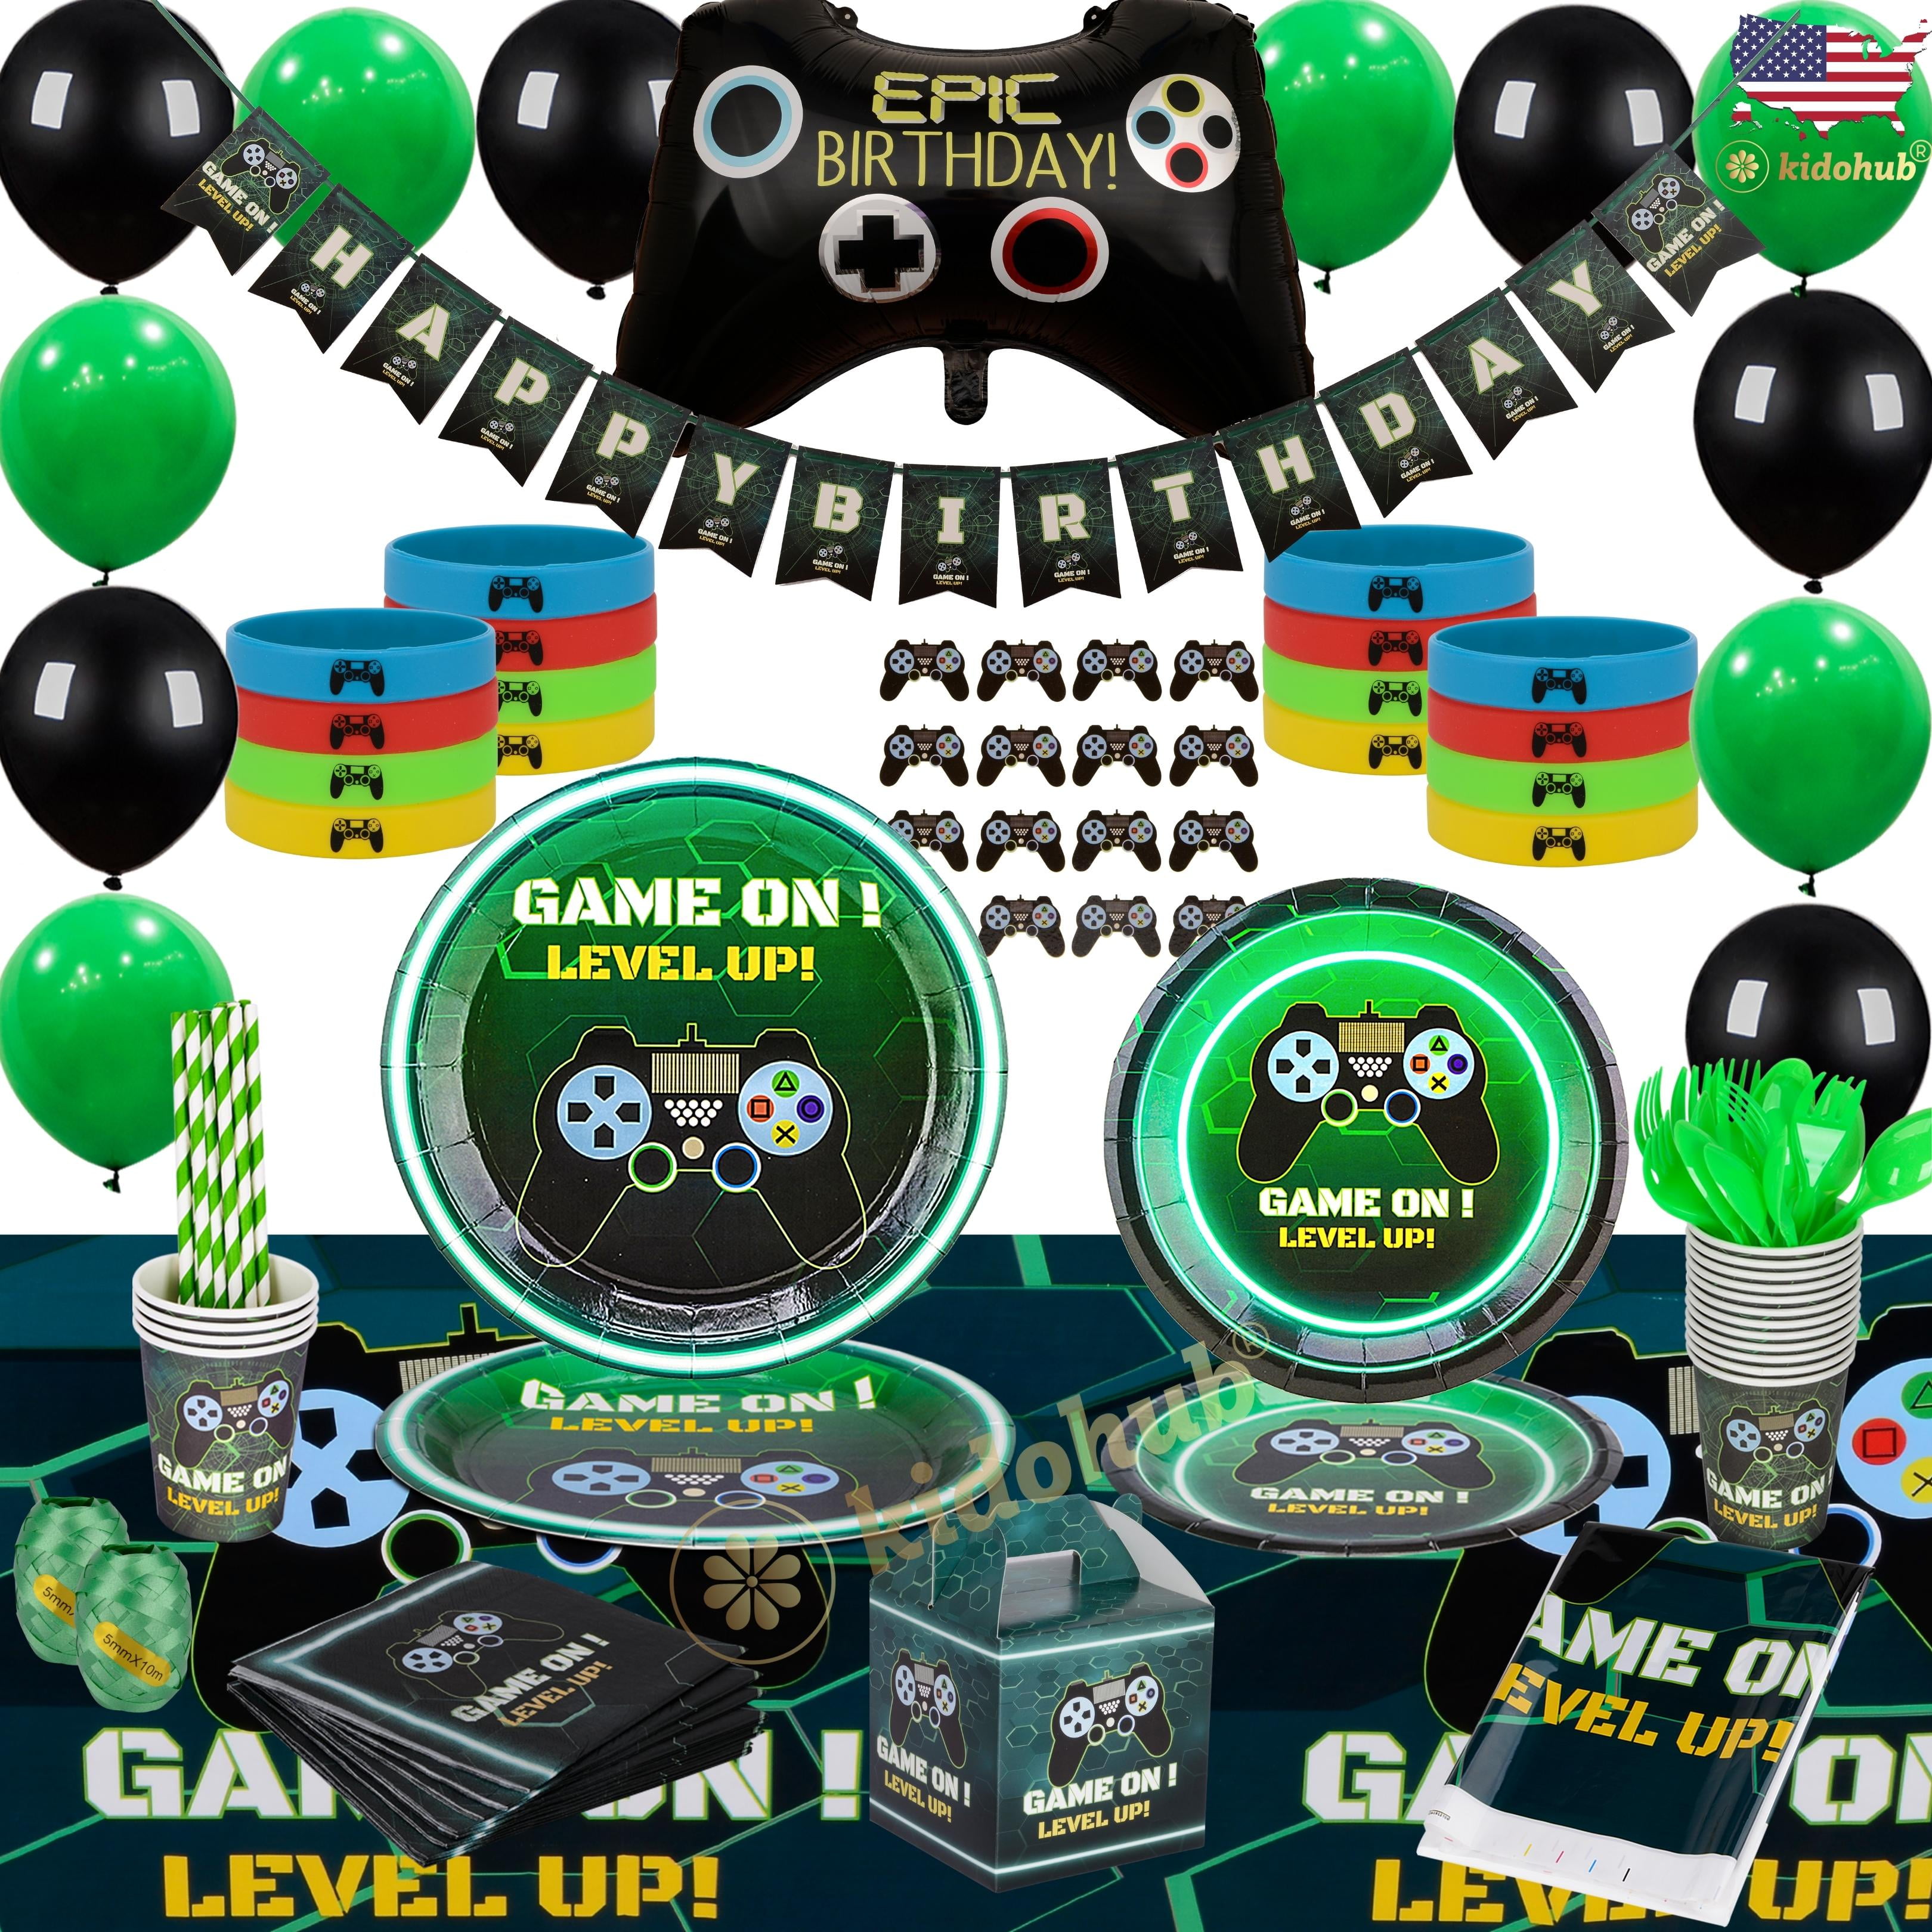 5th Party Supplies Decorations,53 PCS Video Game Party Supplies,Including Gaming Banner Green Balloons for Boys Kids Birthday Decorations